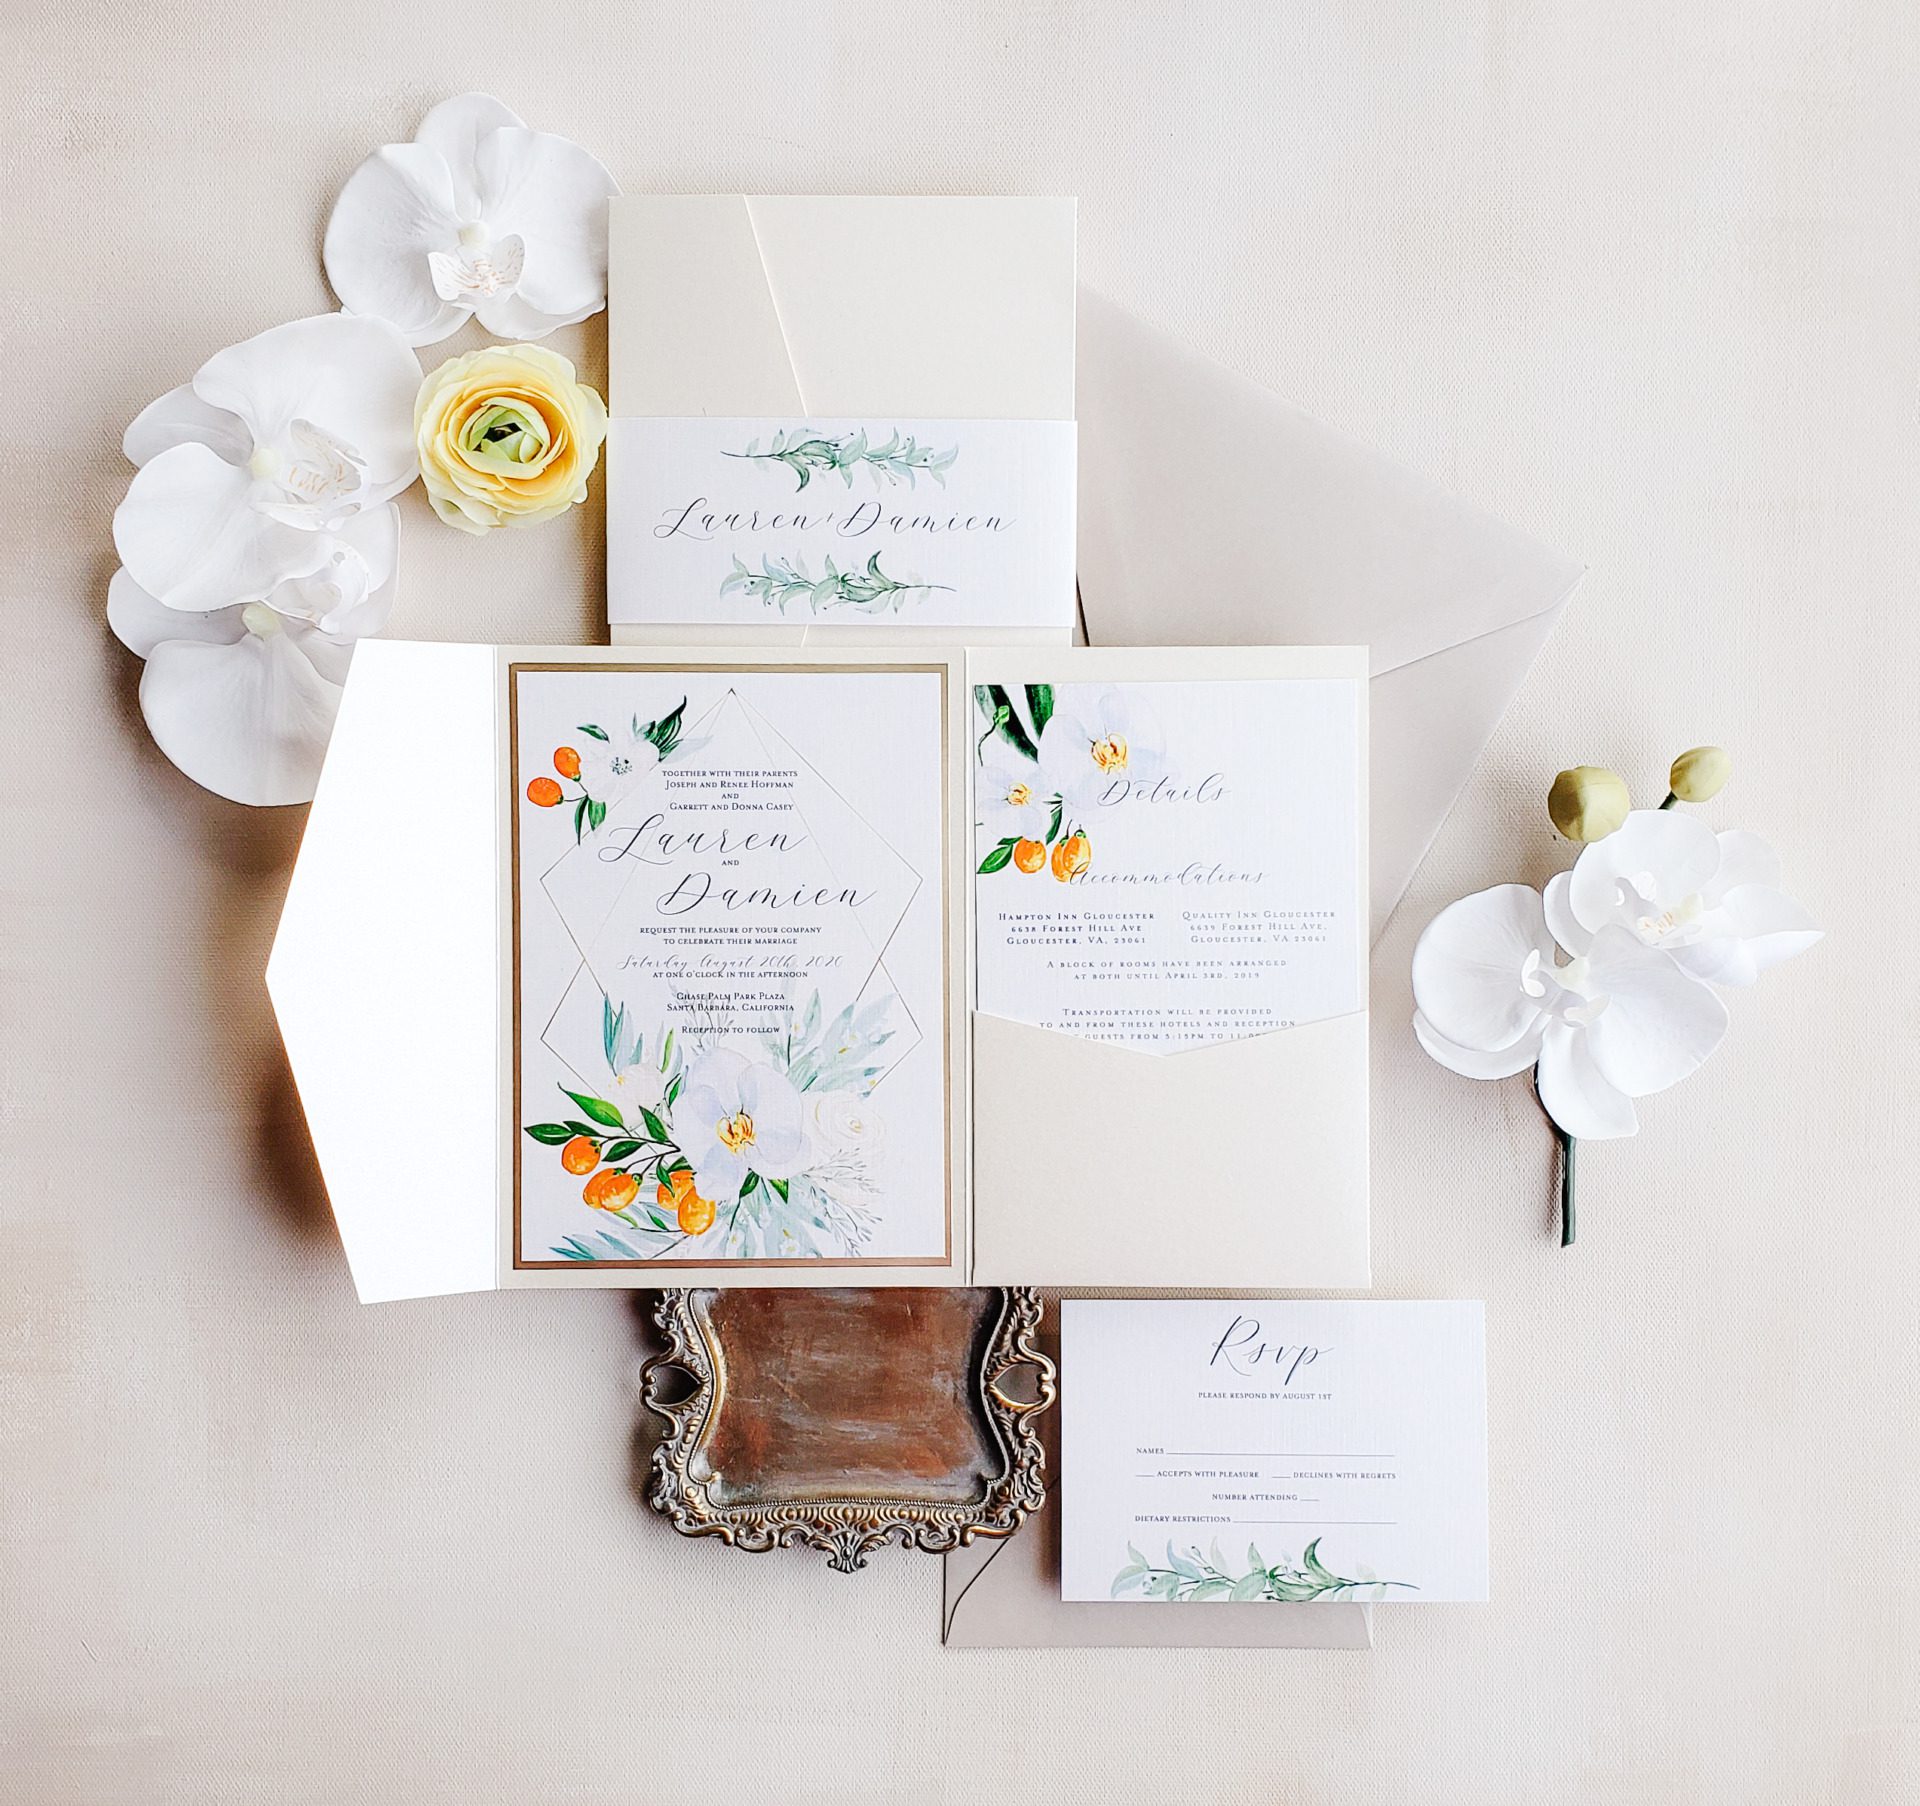 [vc_row][vc_column][vc_column_text]Purchase this listing to get a sample of our <b>Mesa </b>wedding invitation suite.

<strong>The sample includes:</strong>

• 5.25